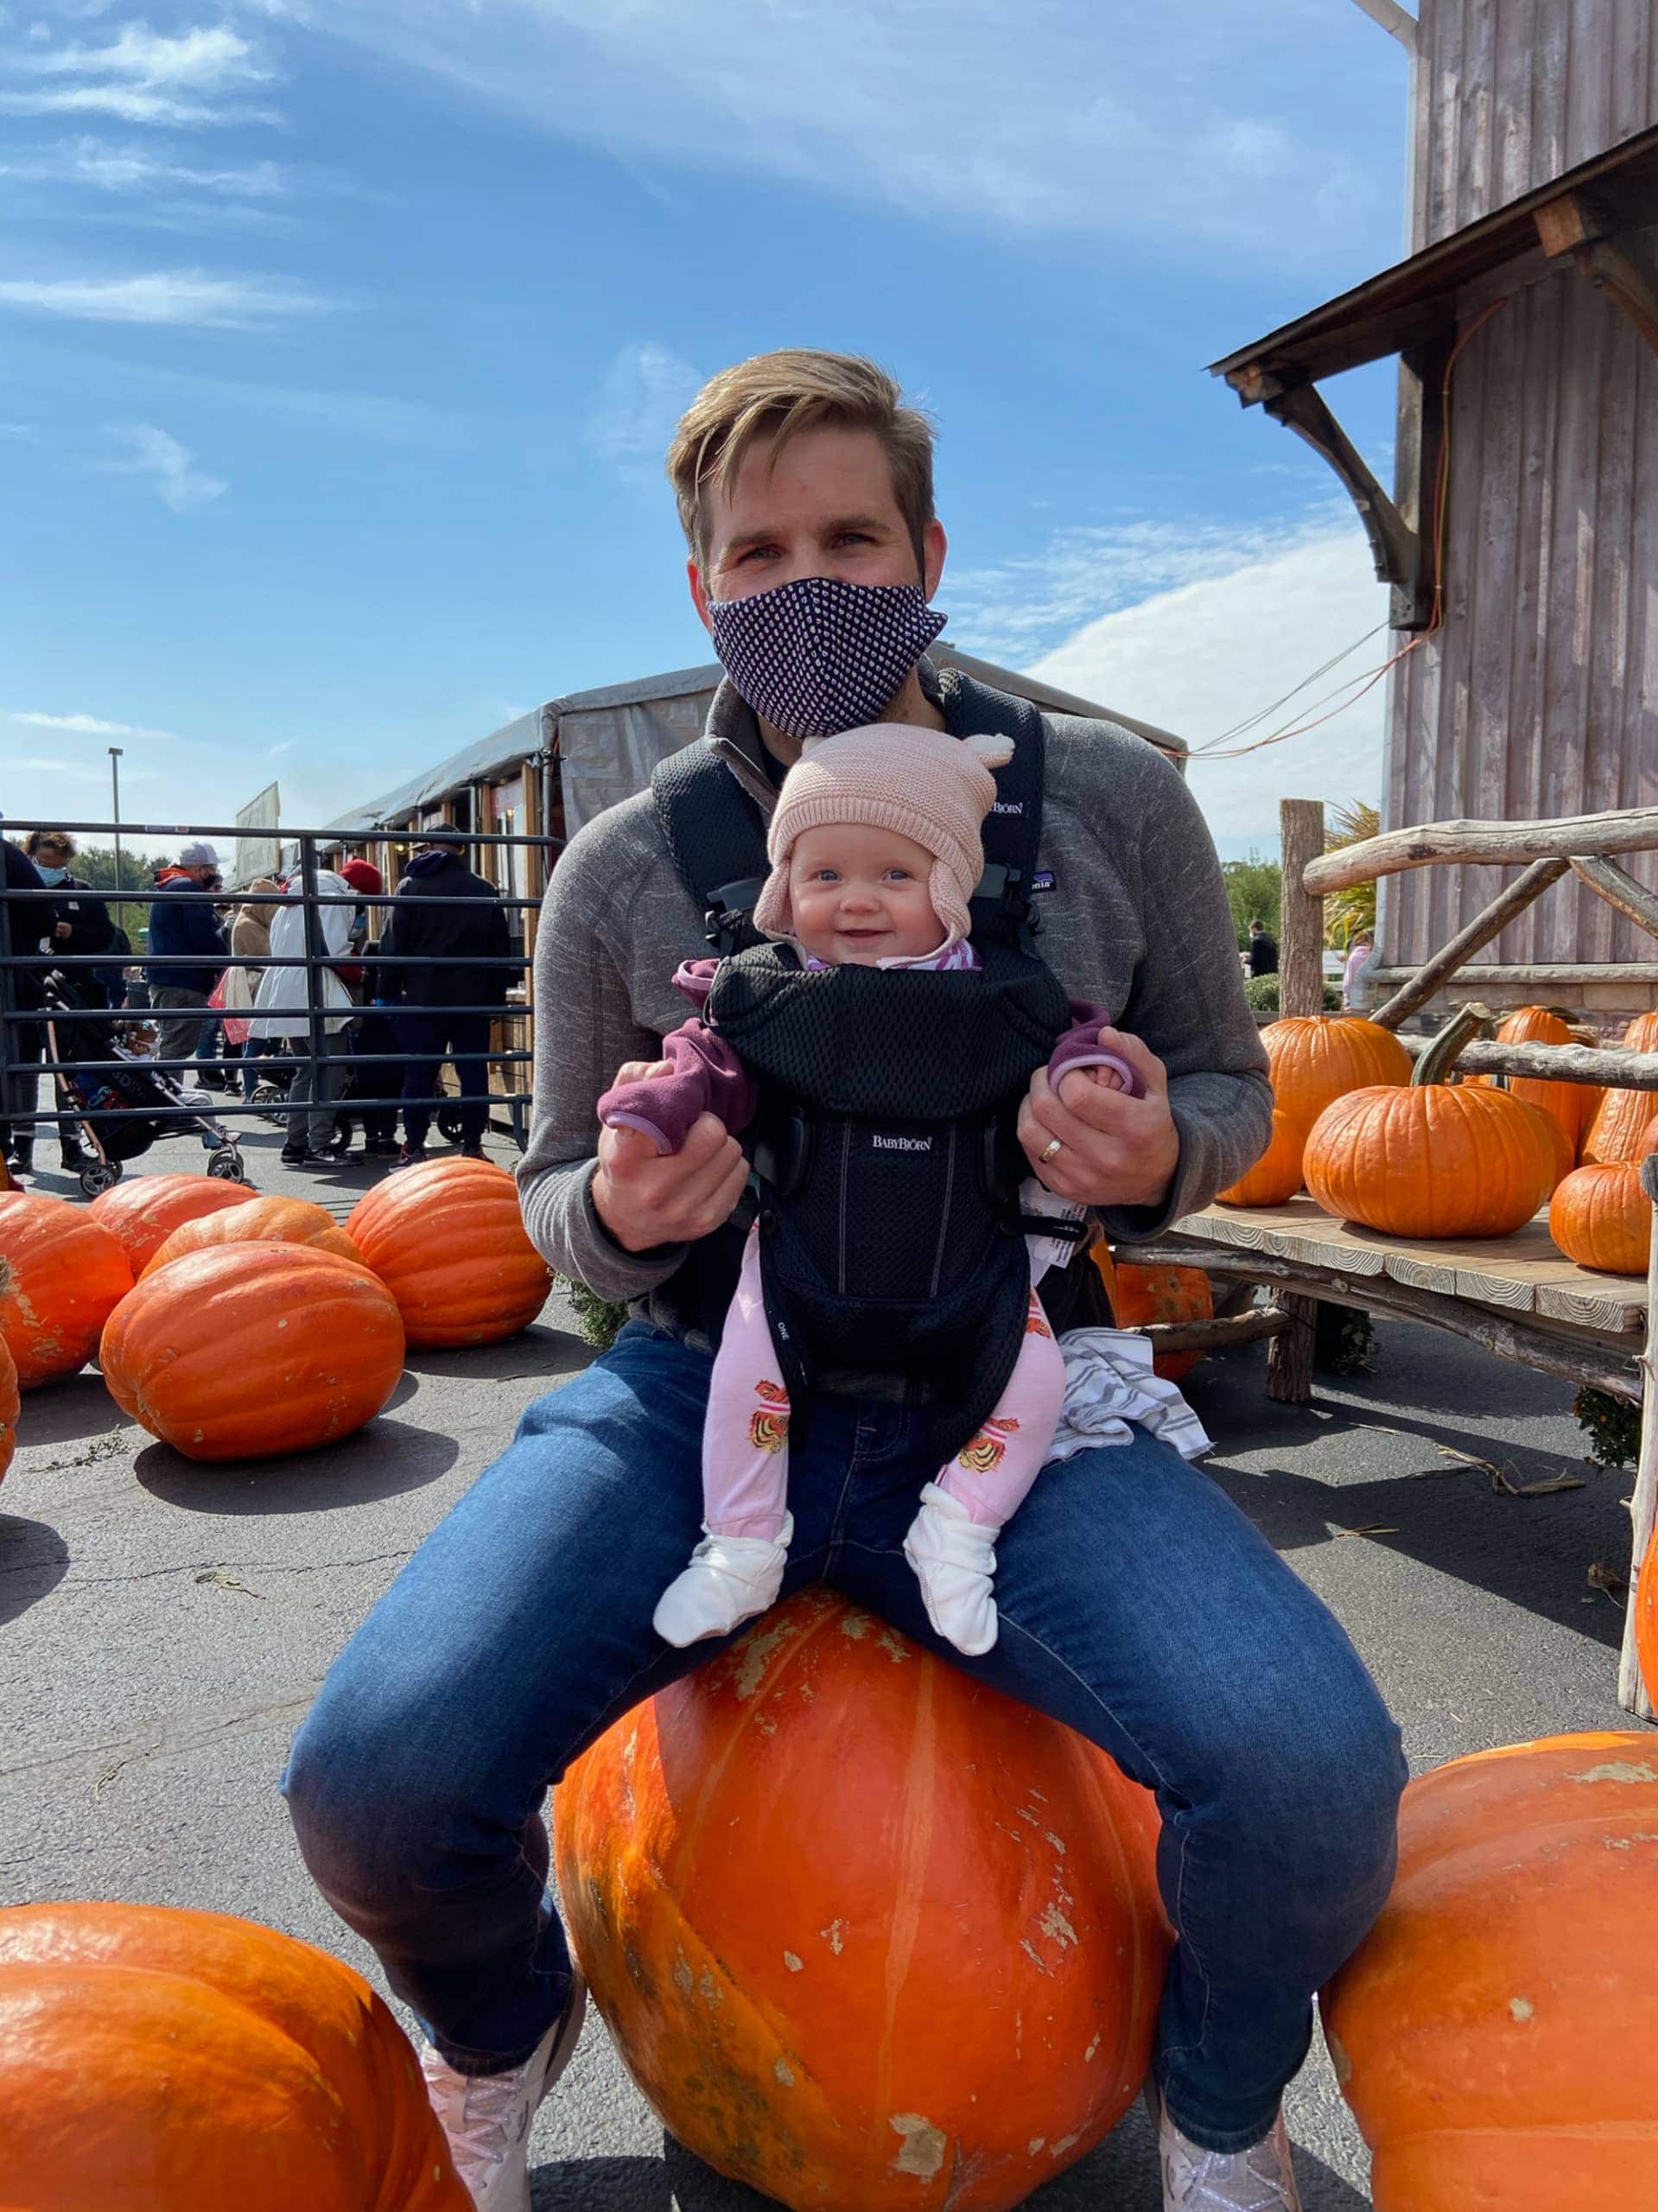 Finn and Rory at the pumpkin patch in October 2020